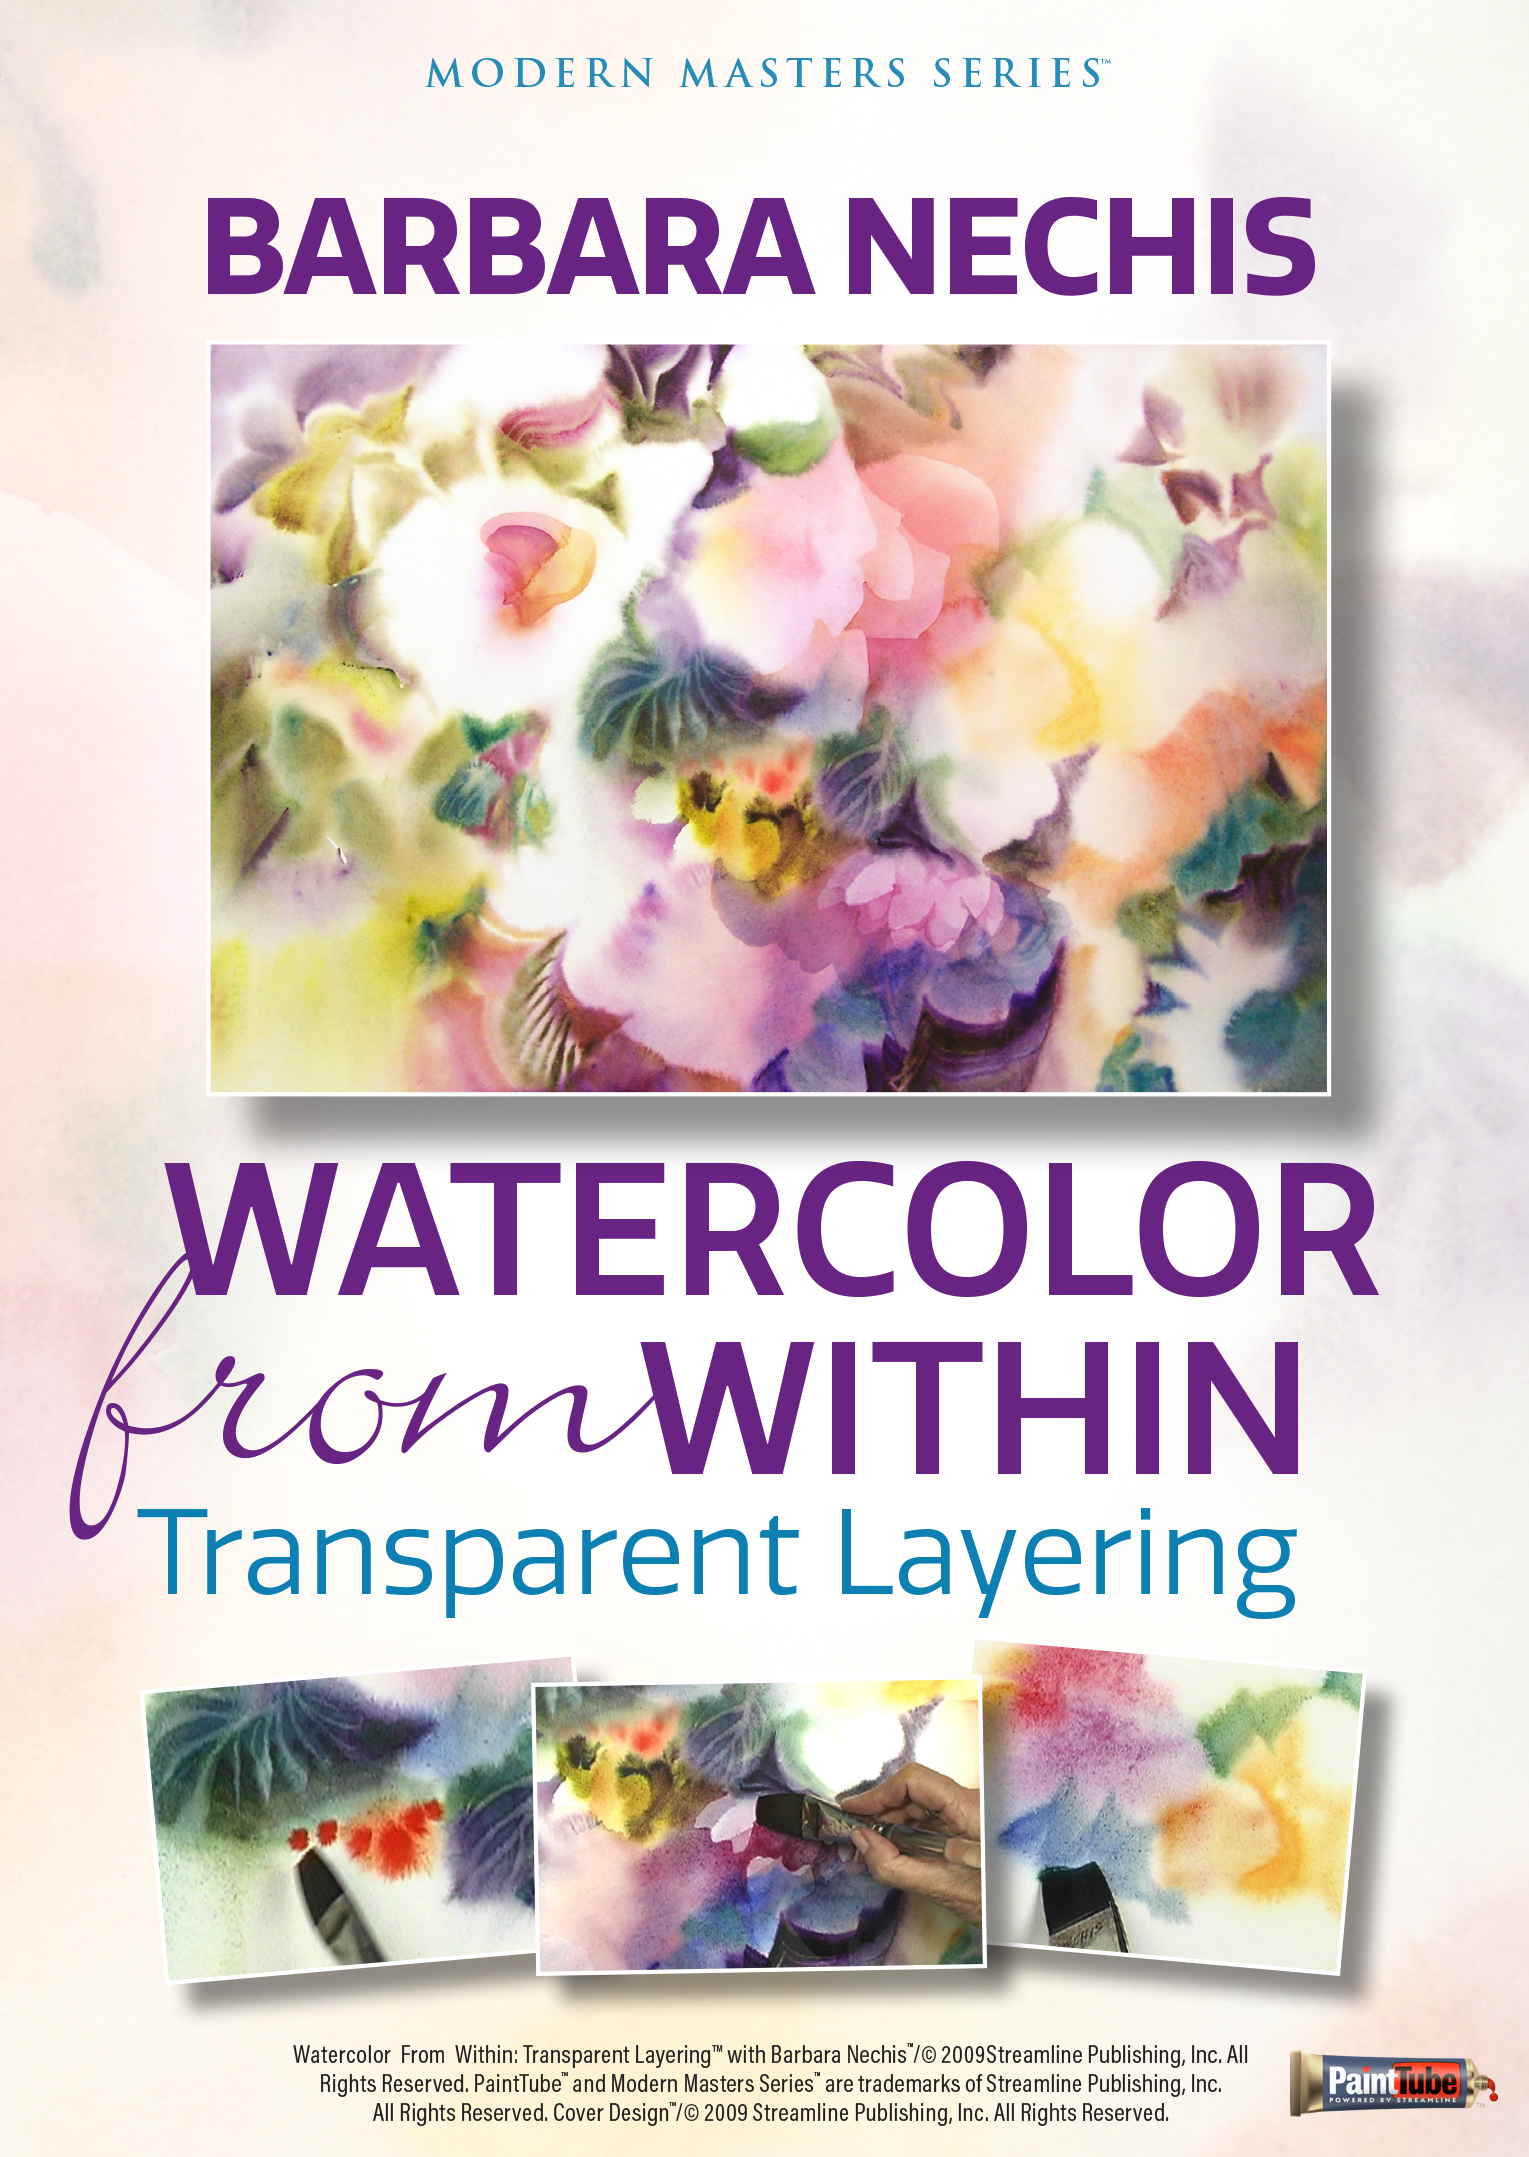 Barbara Nechis: Watercolor from Within: Transparent Layering